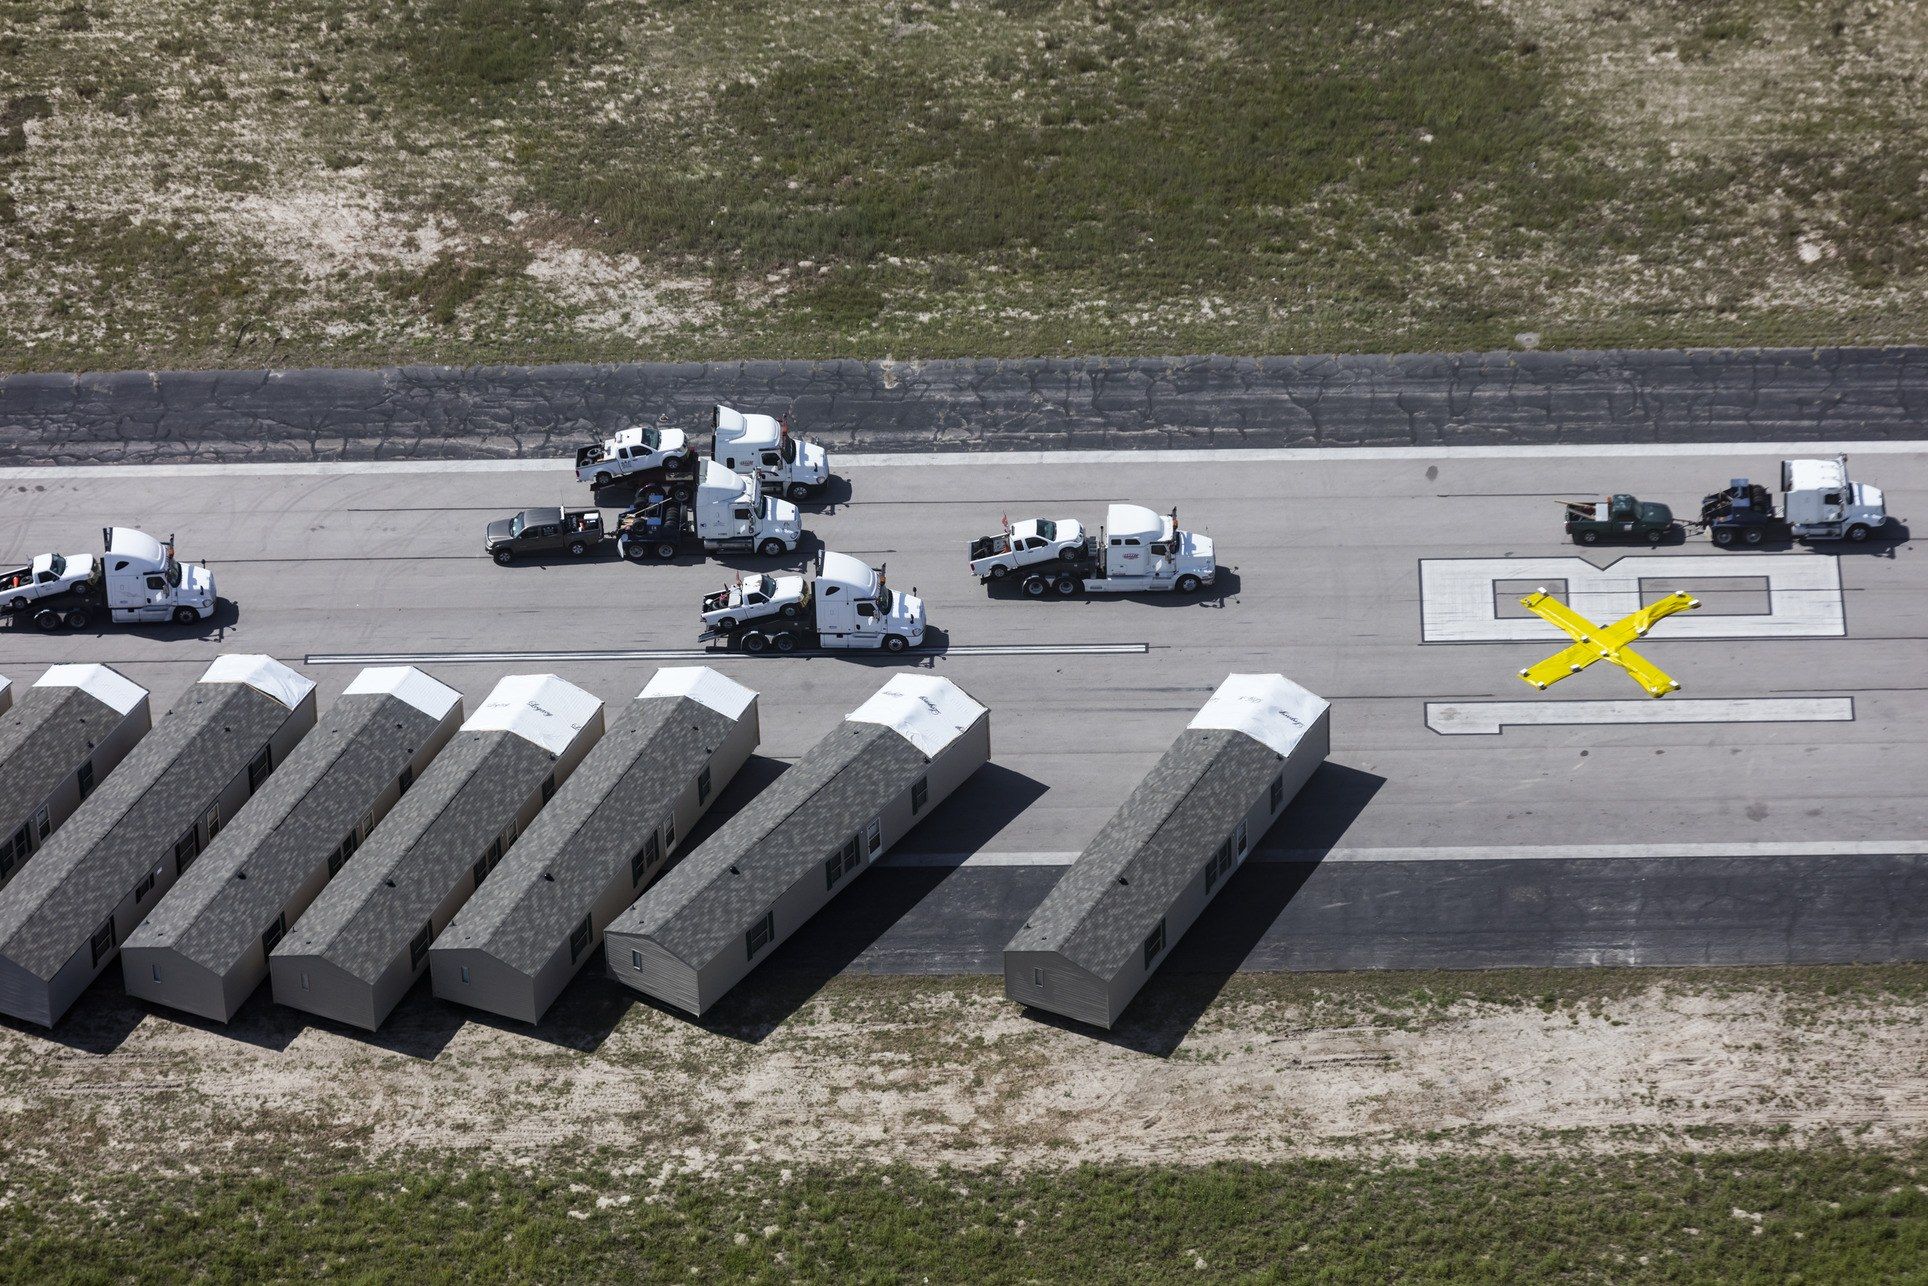 After Hurricane Harvey struck, the north-south runaway at Rockport's Aransas County Airport was converted into a staging area for recovery efforts, first as a lot for utility trucks and then for mobile homes brought in by FEMA to temporarily replace destroyed buildings. Image by Alex MacLean. United States, 2017. 